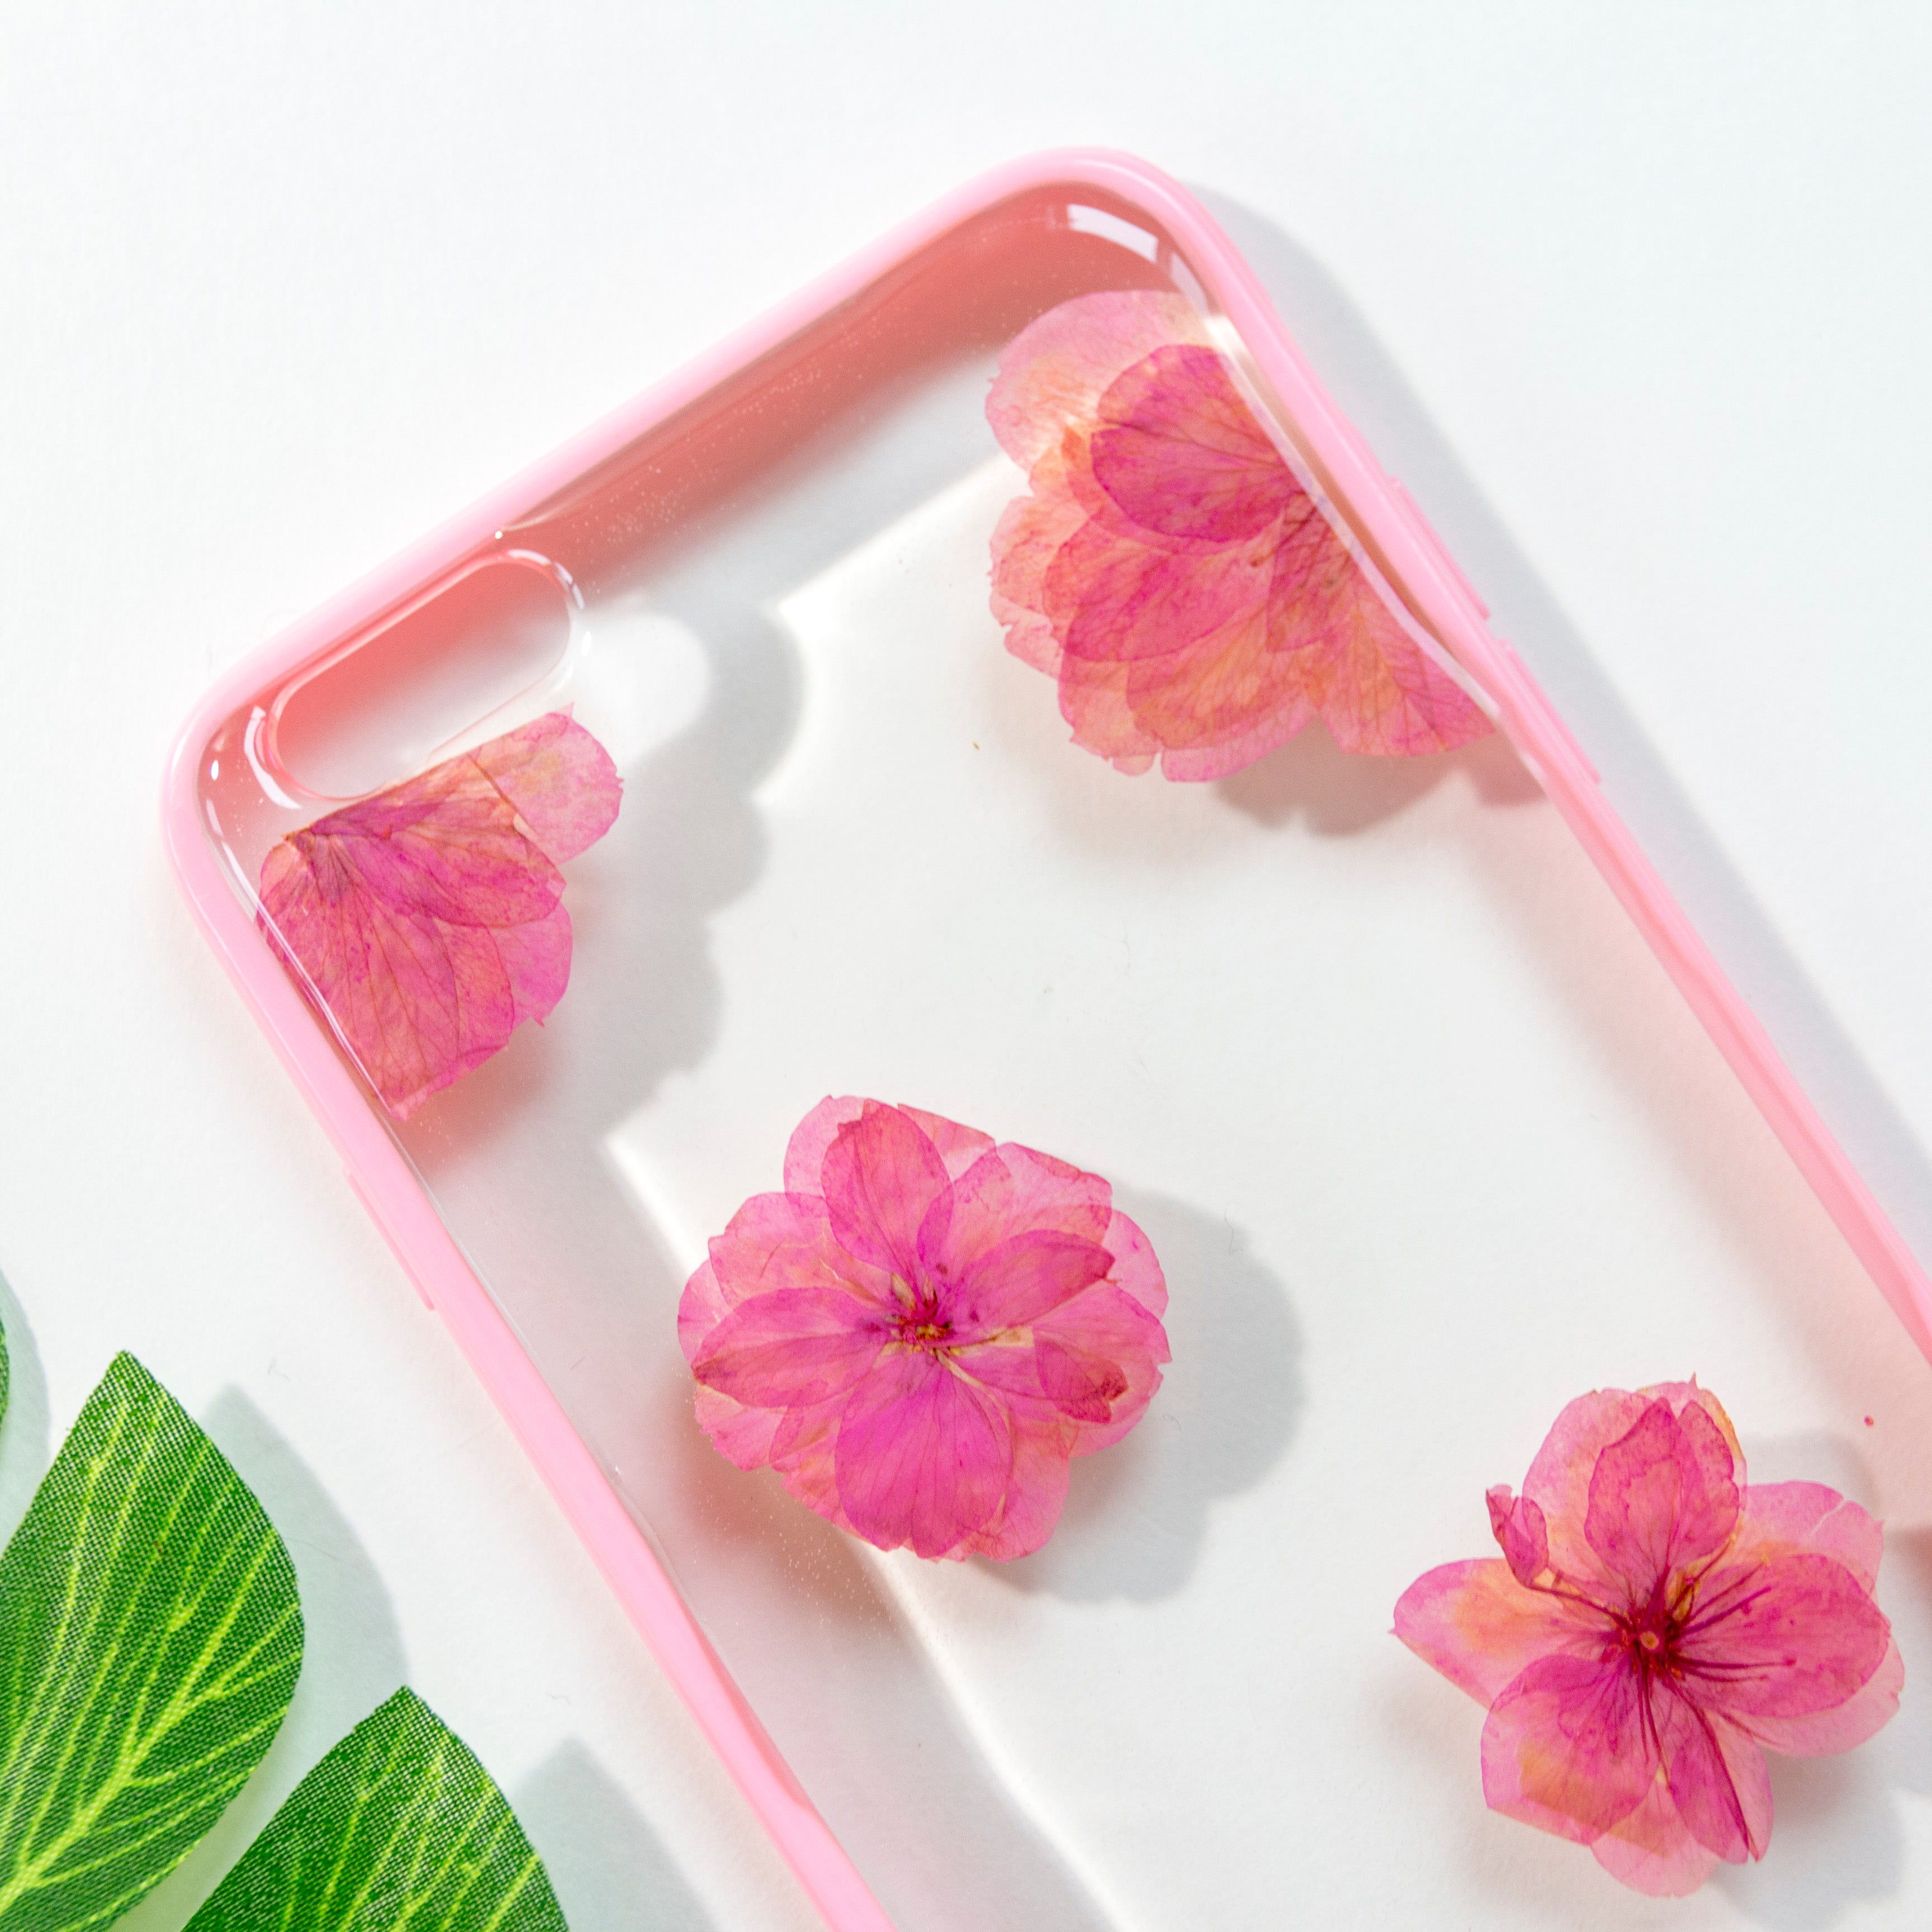 pressed_pink_cherry_blossom_flower_cute_protective_iPhone_6_6s_plus_floral_bumper_case_floral_neverland_floralfy_cherry_rain